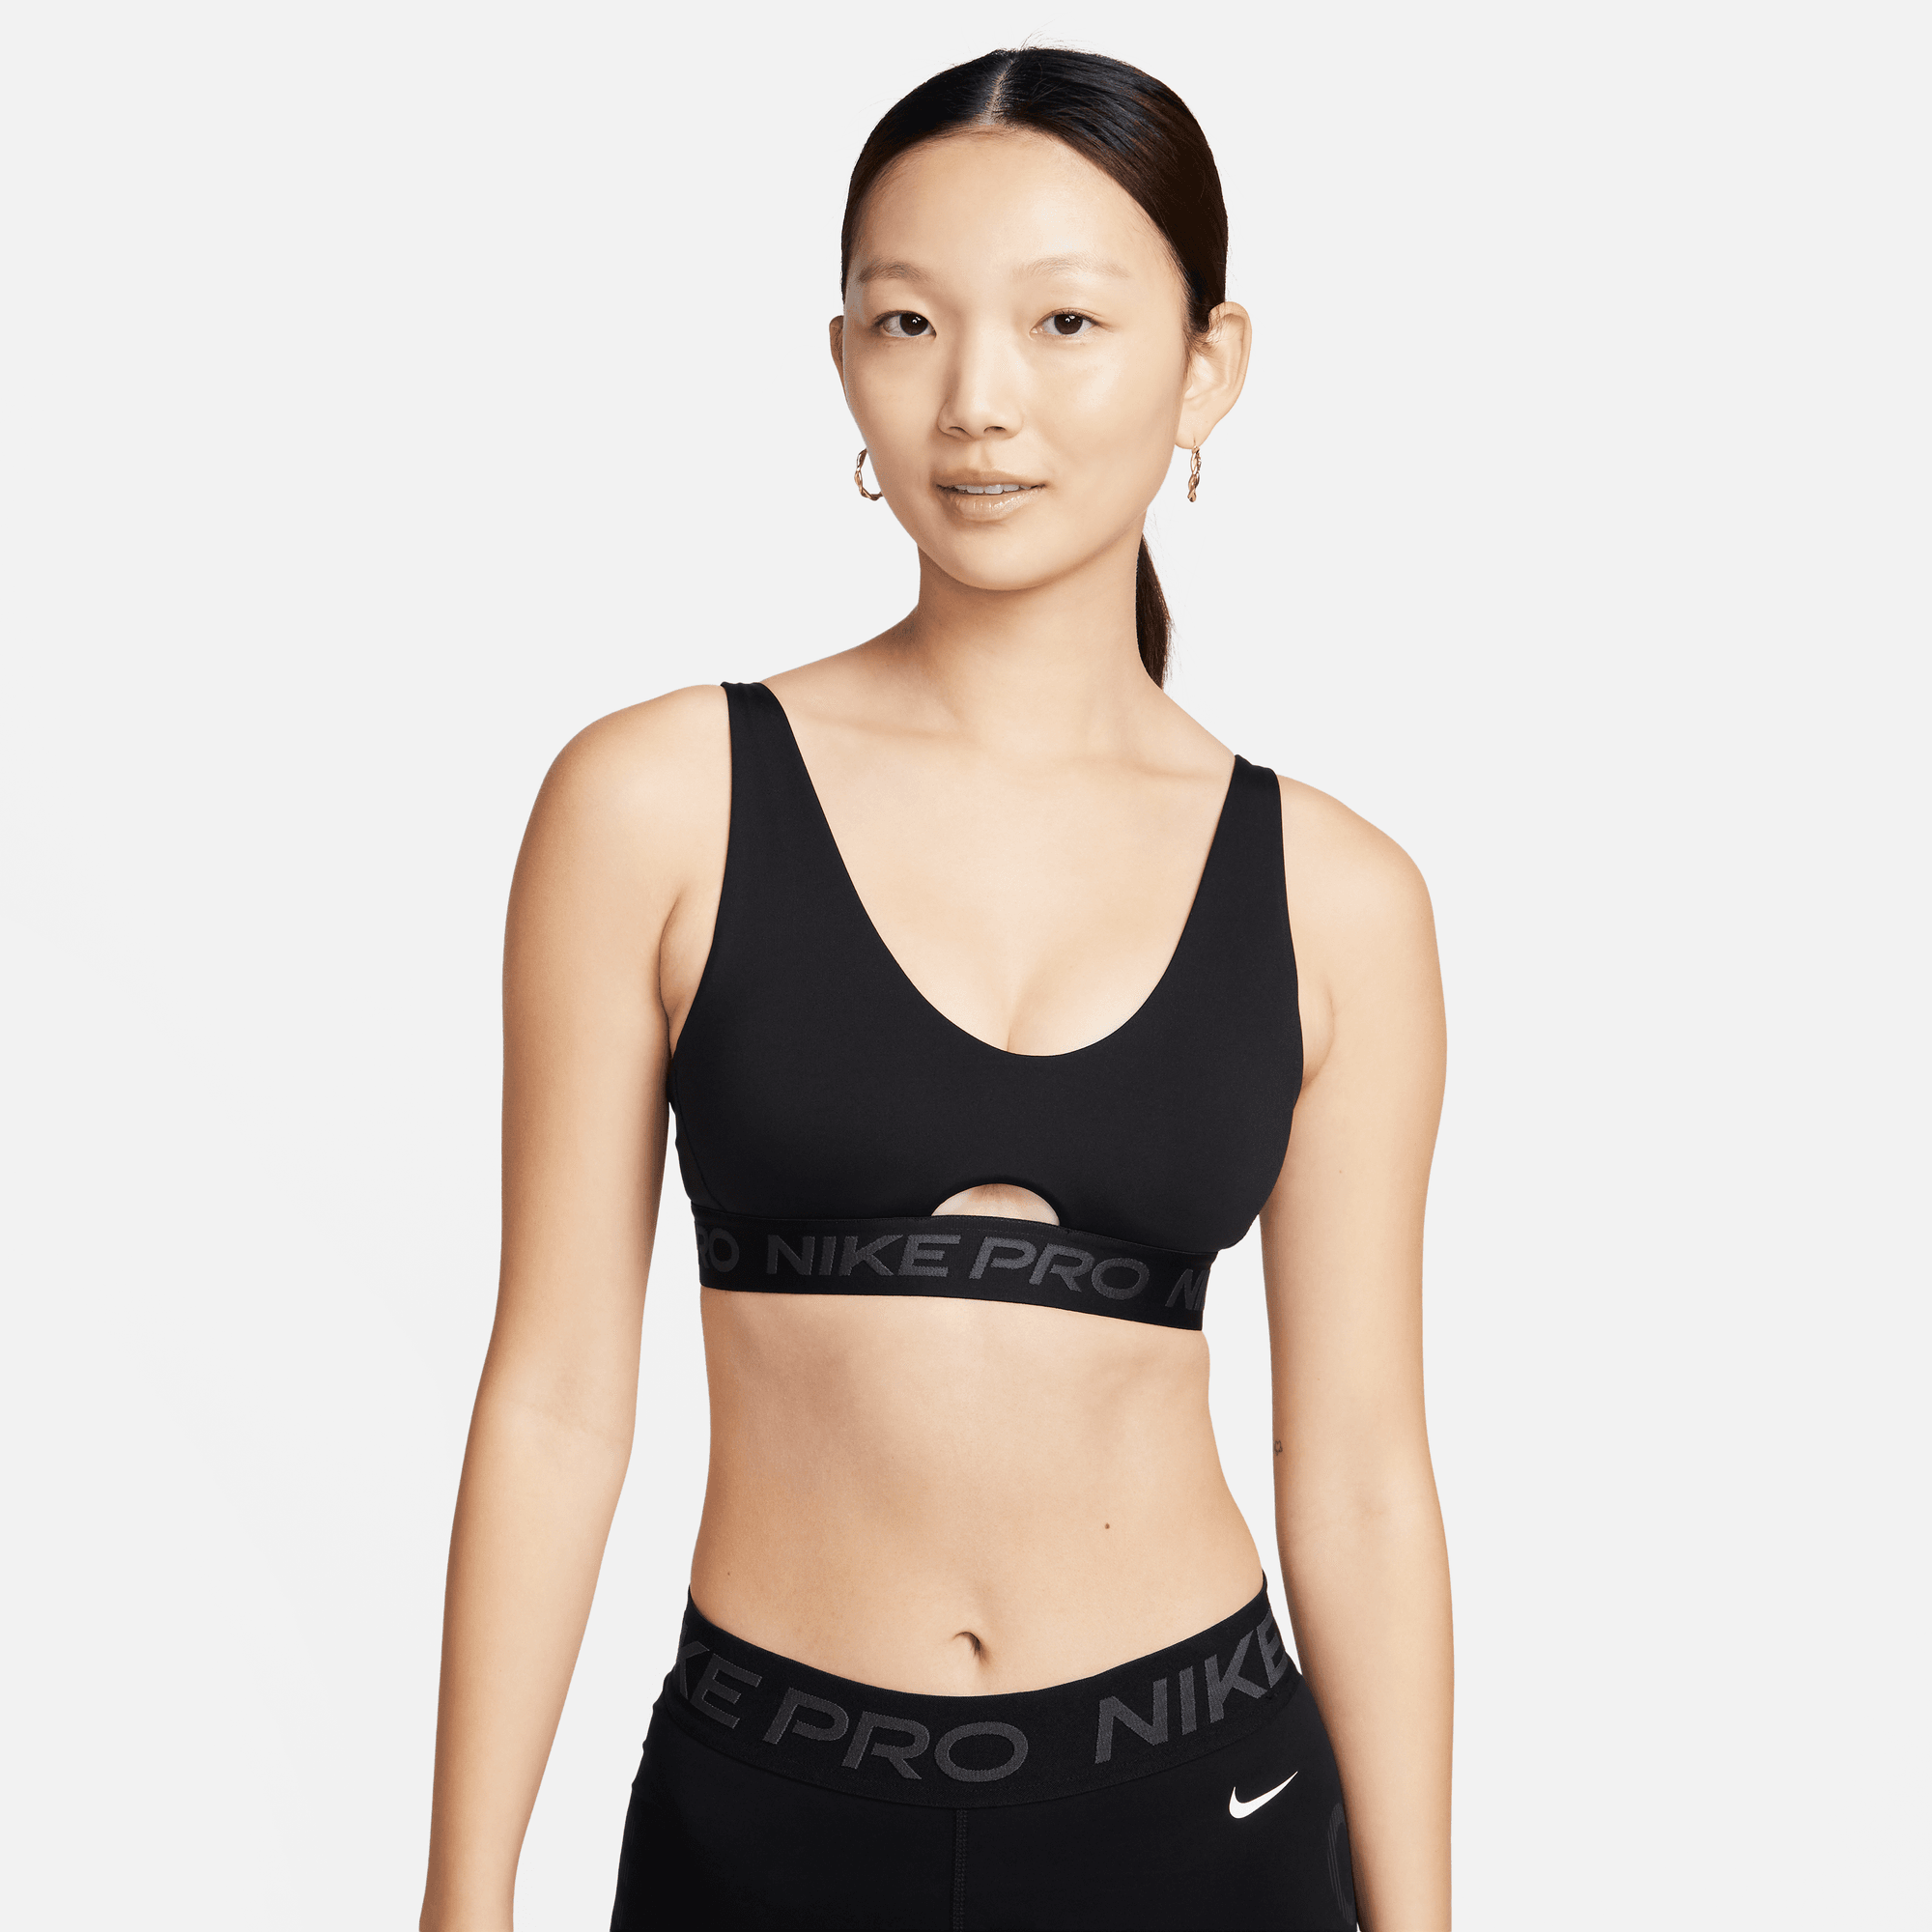 Urban Outfitters Black Plunge Sports Bra Women's Size M-L NEW